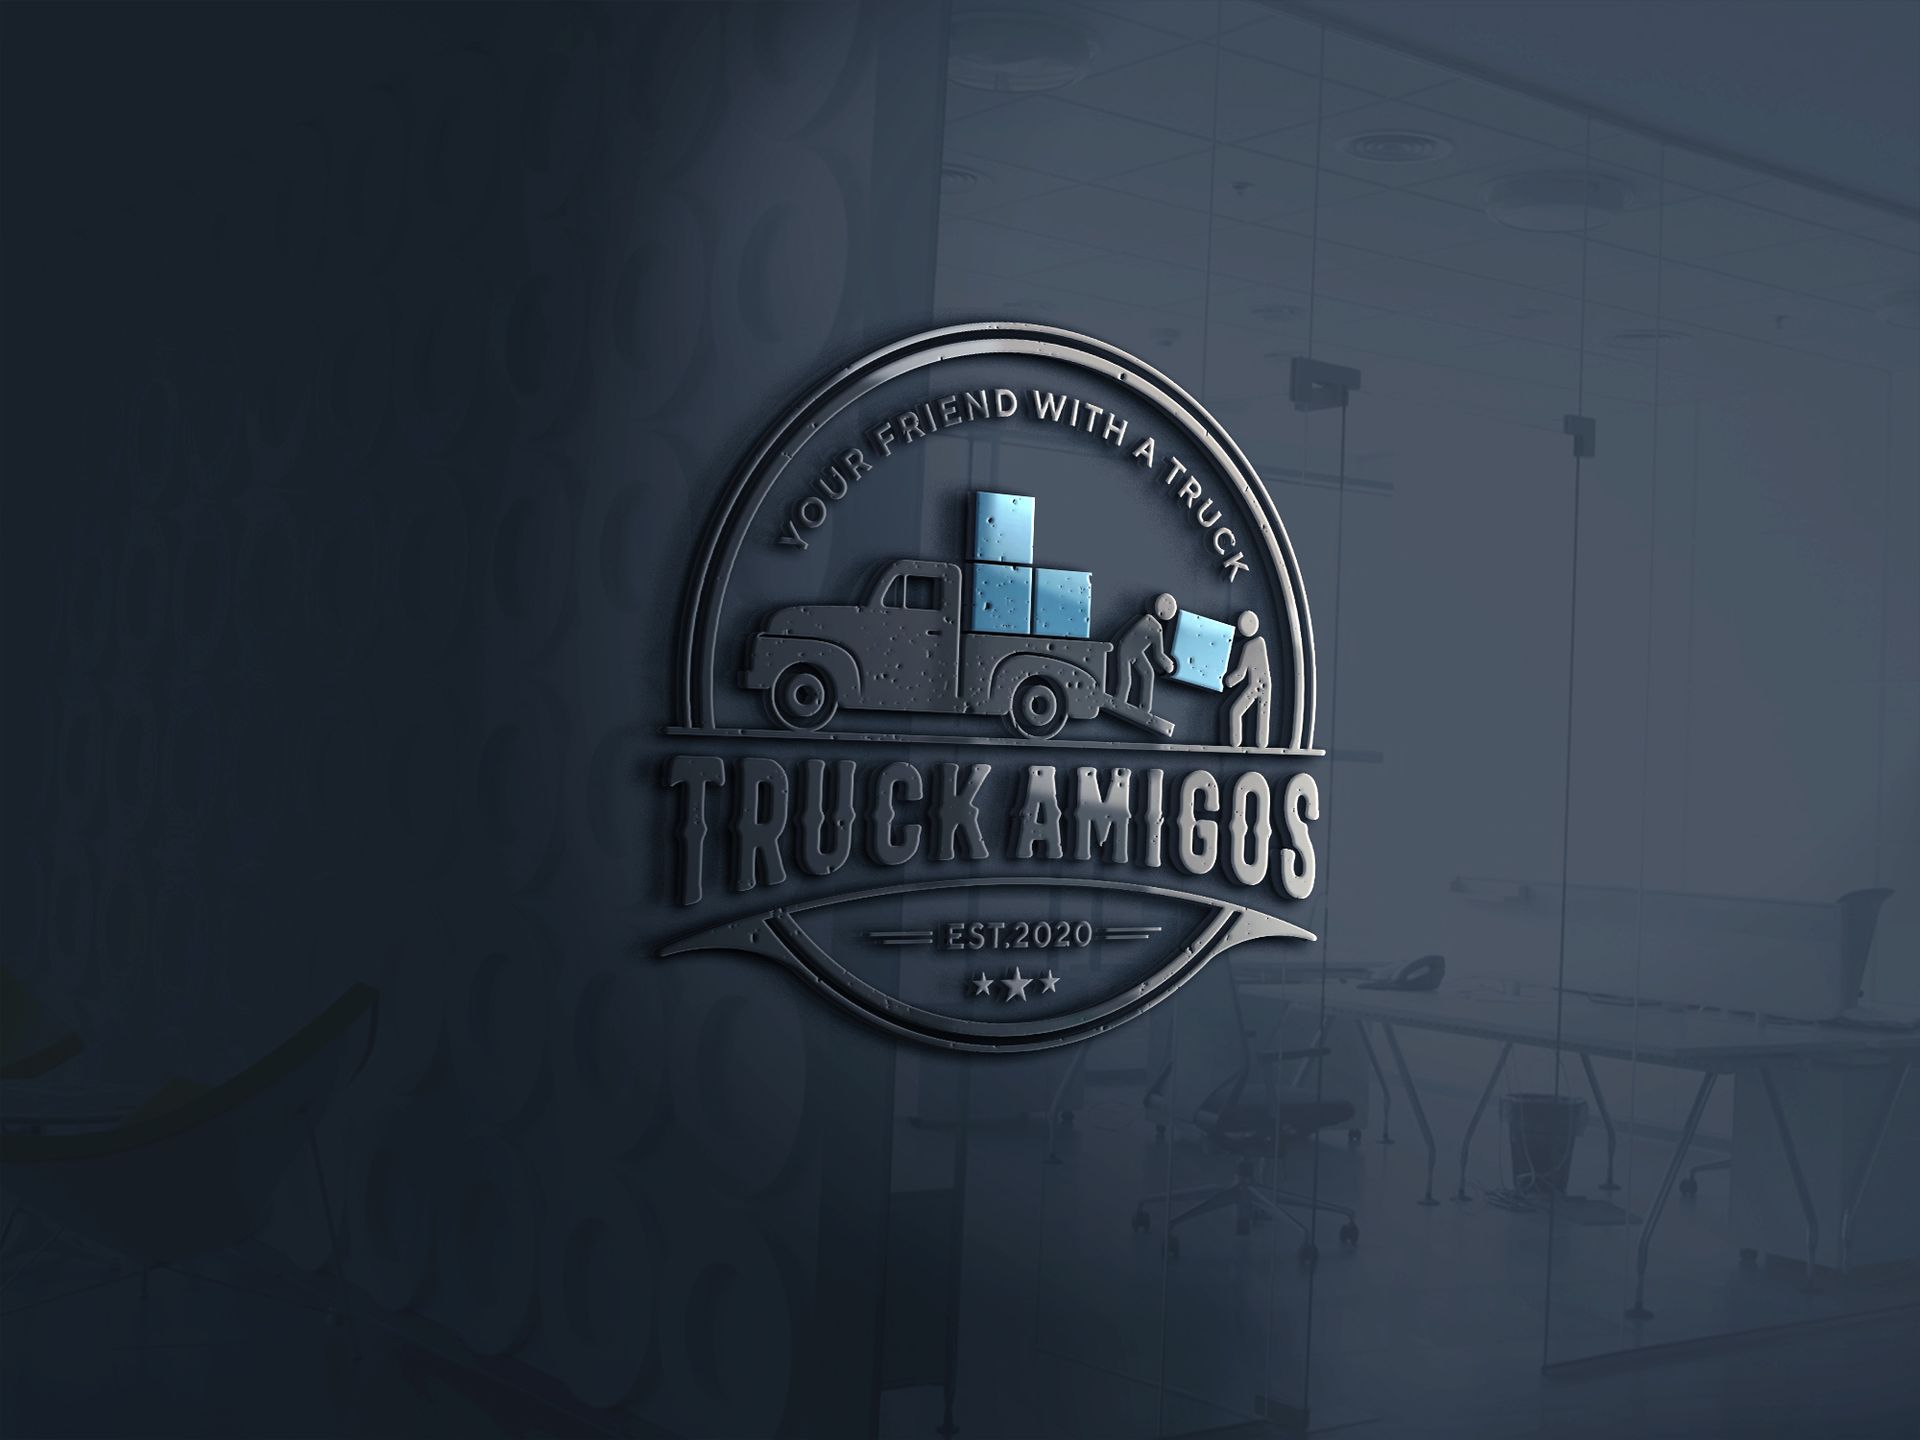 A logo for a company called truck amigos is on a glass wall.